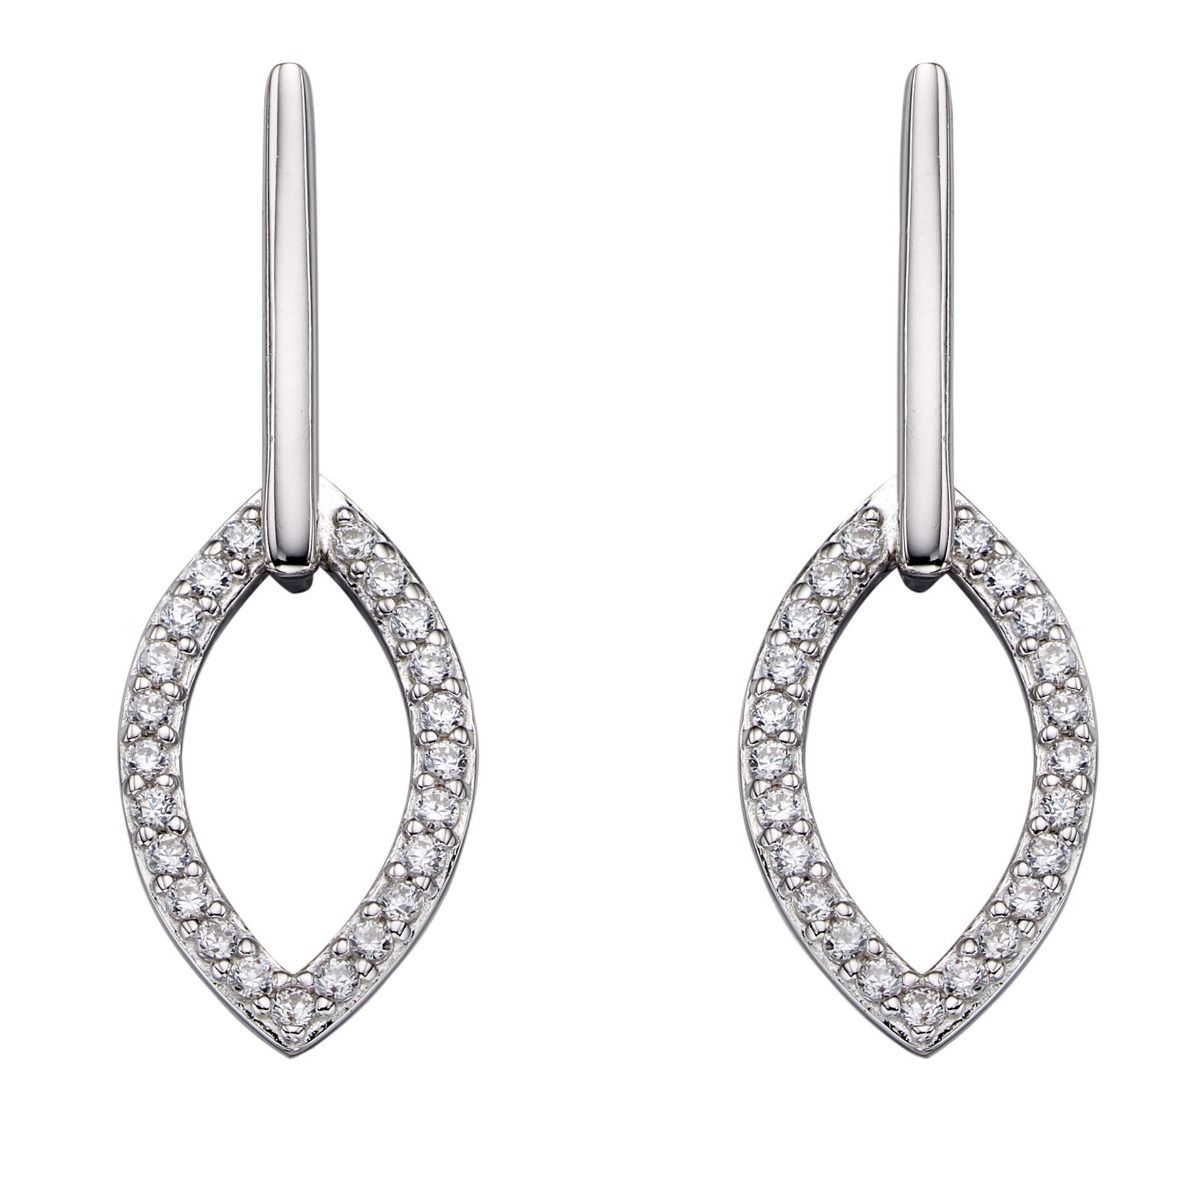 Fiorelli silver and cubic zirconia marquise drop earrings